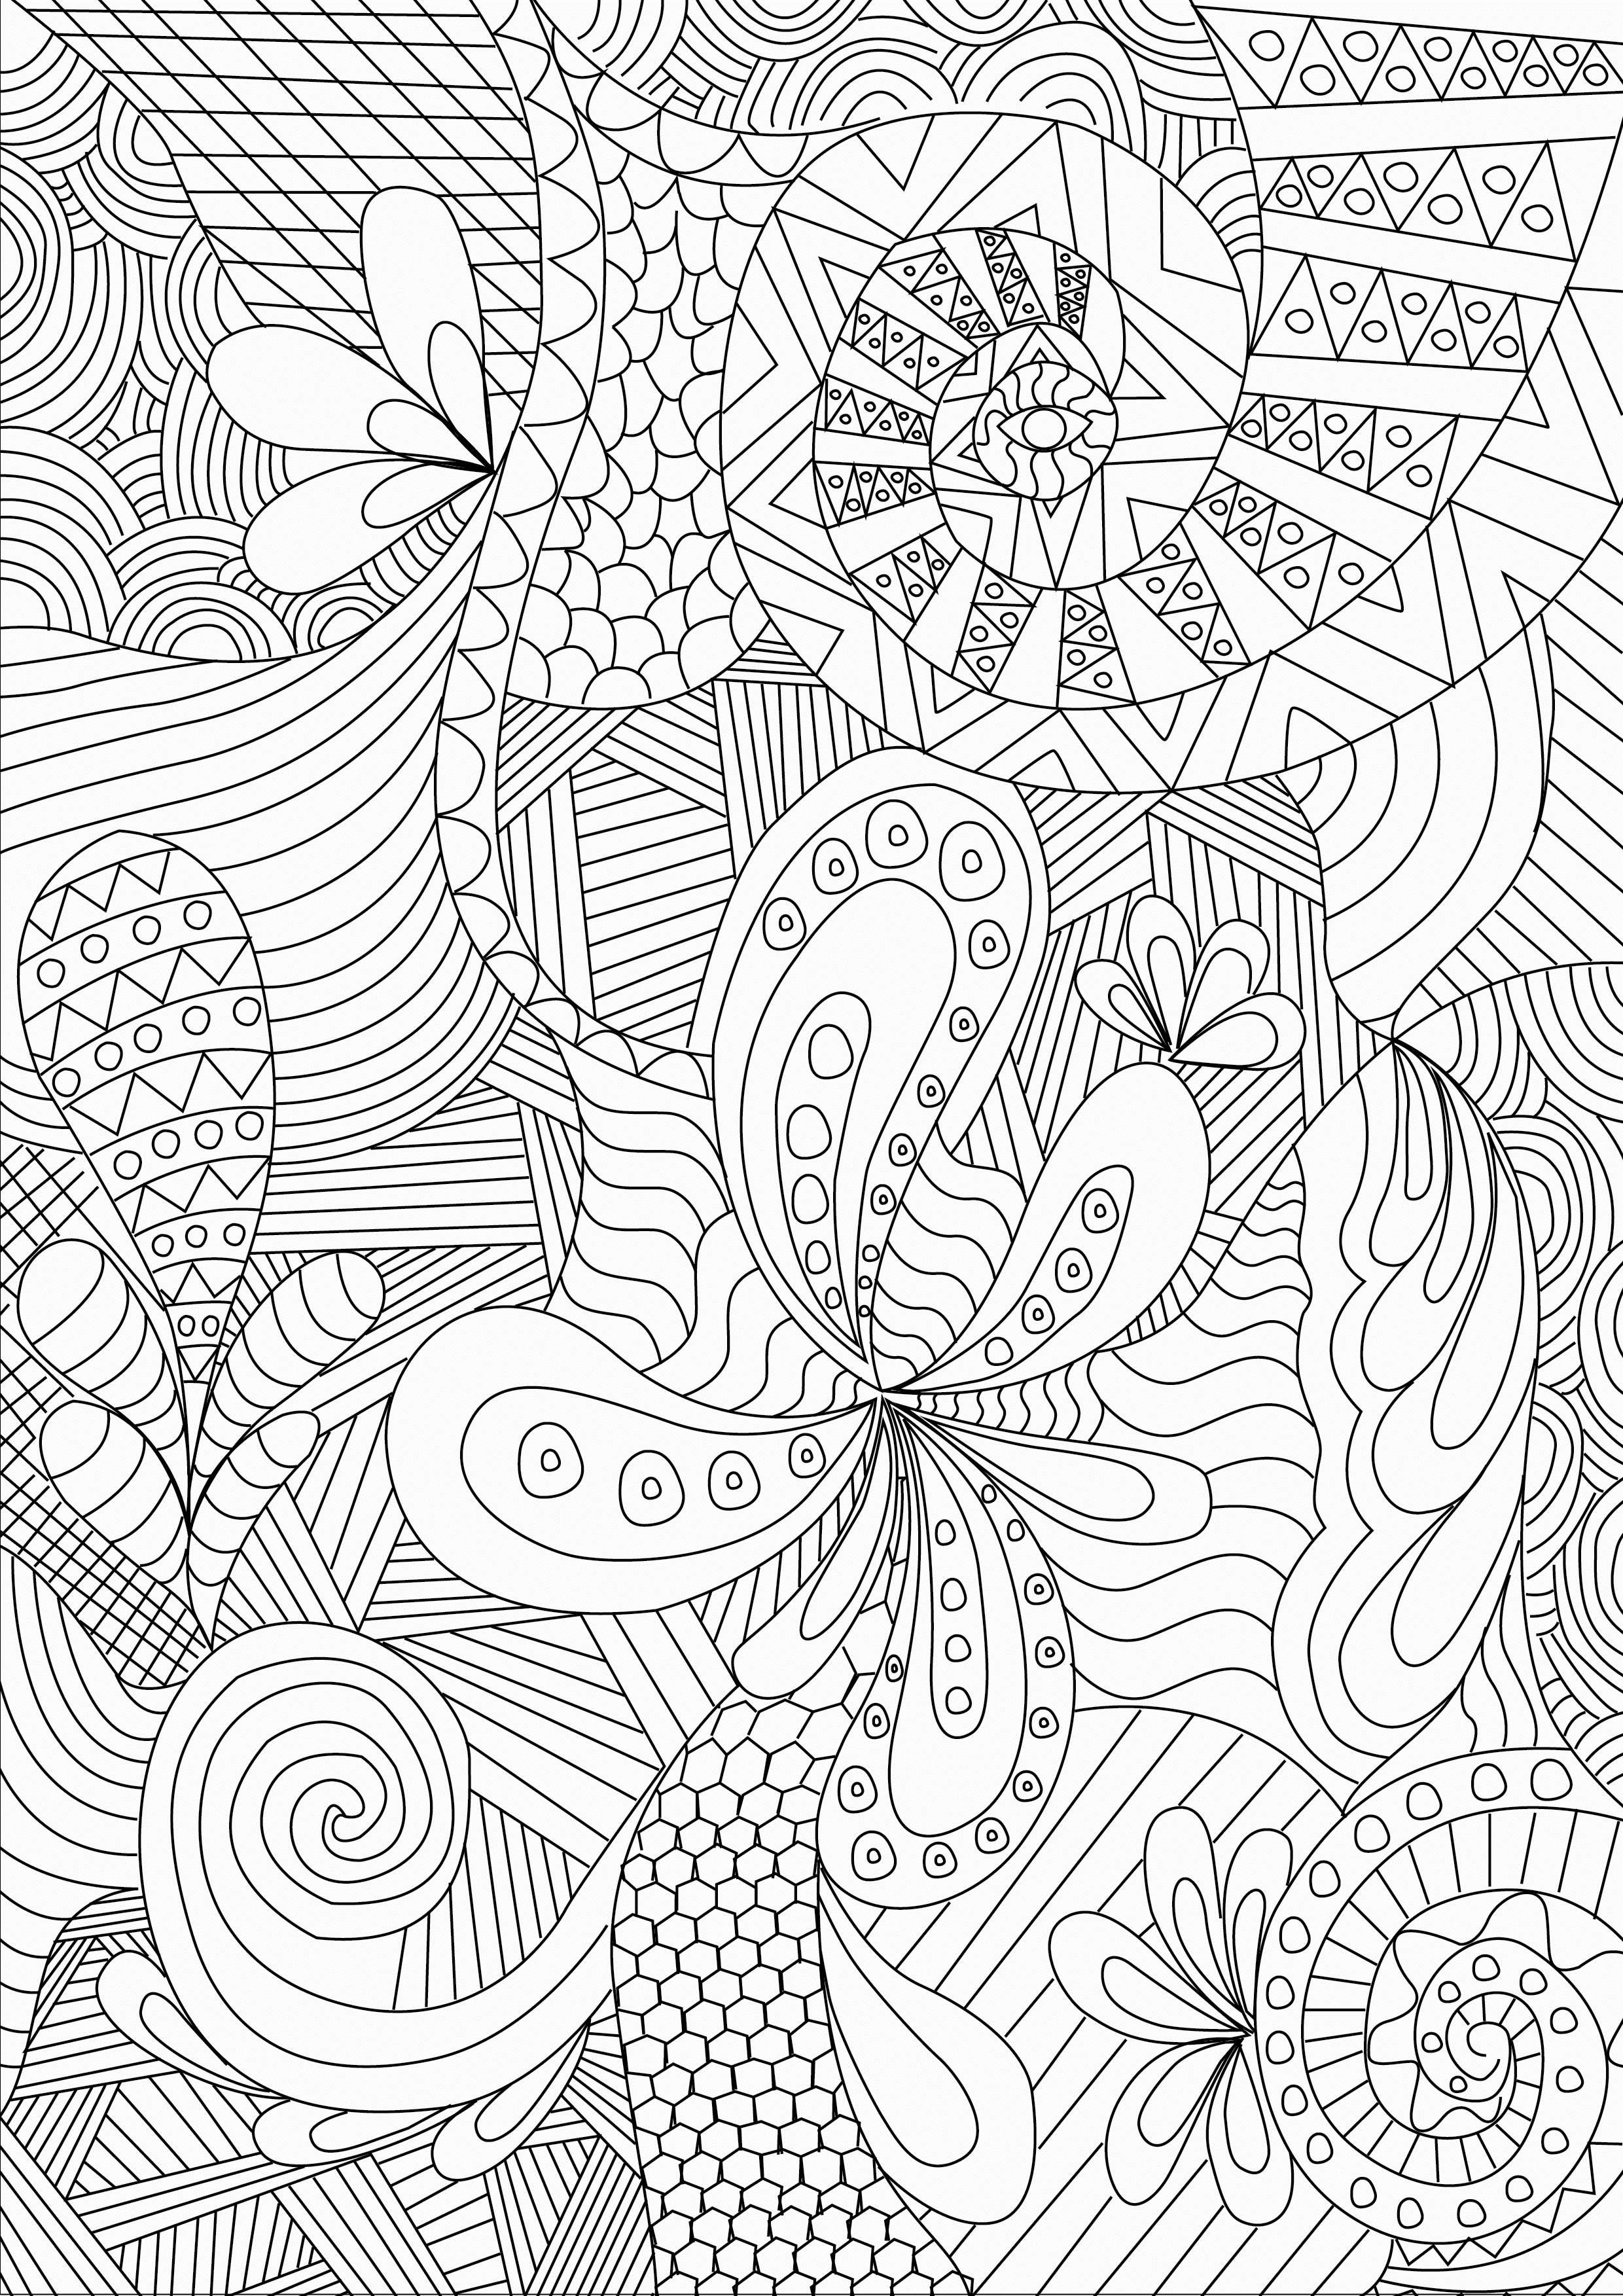 7100 Top Coloring Pages For Special Needs Adults Pictures